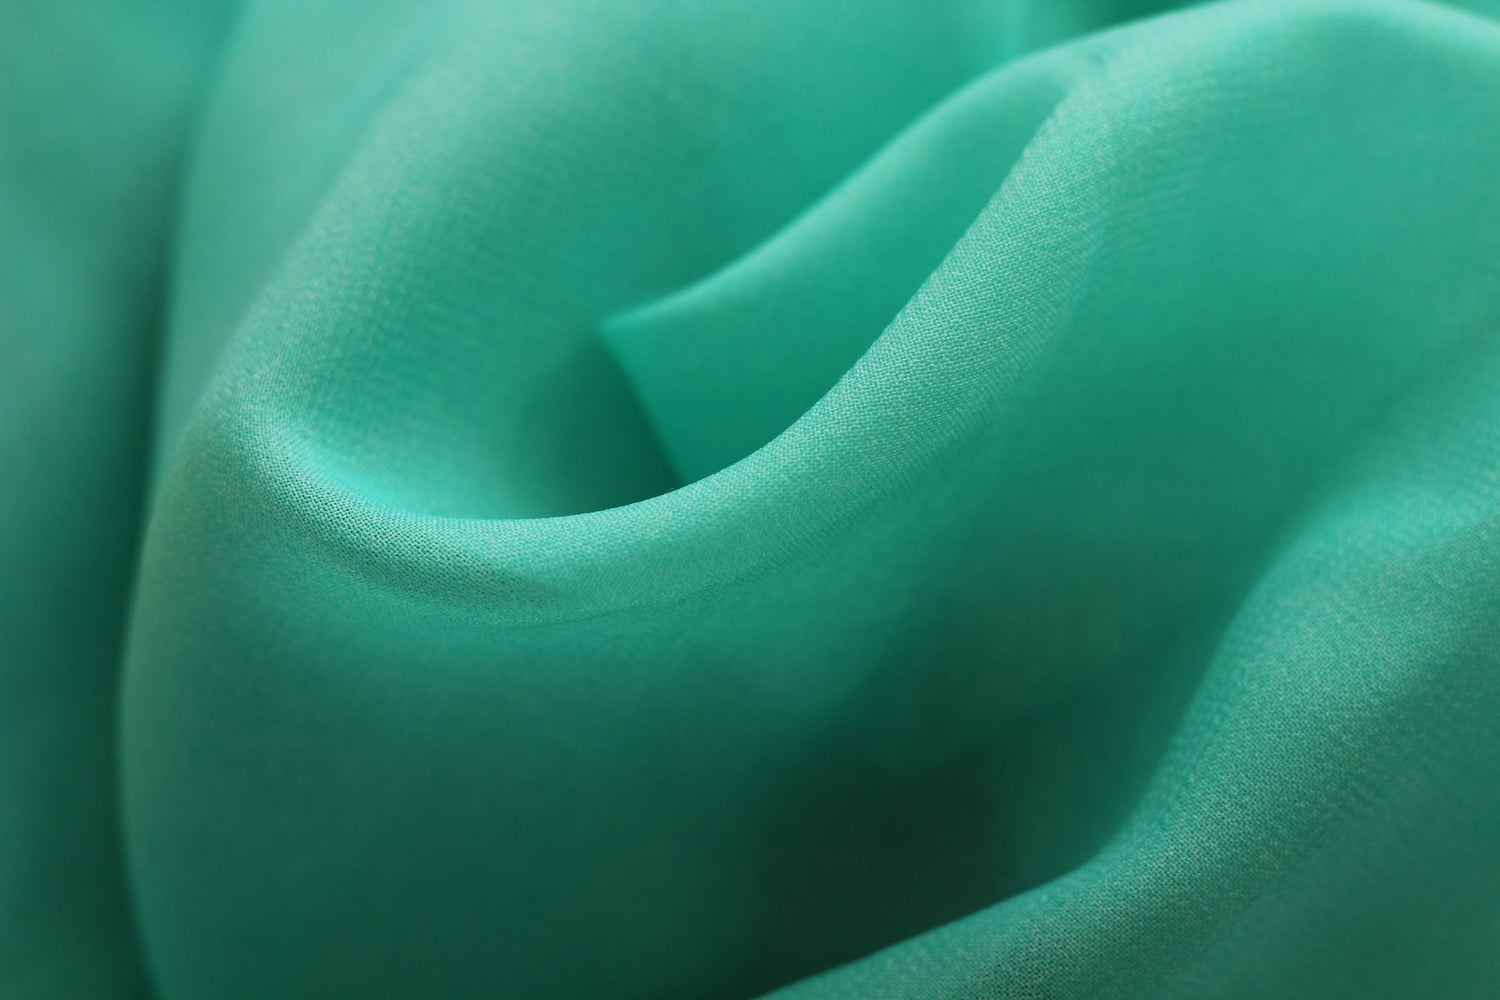 polyester fabric up close